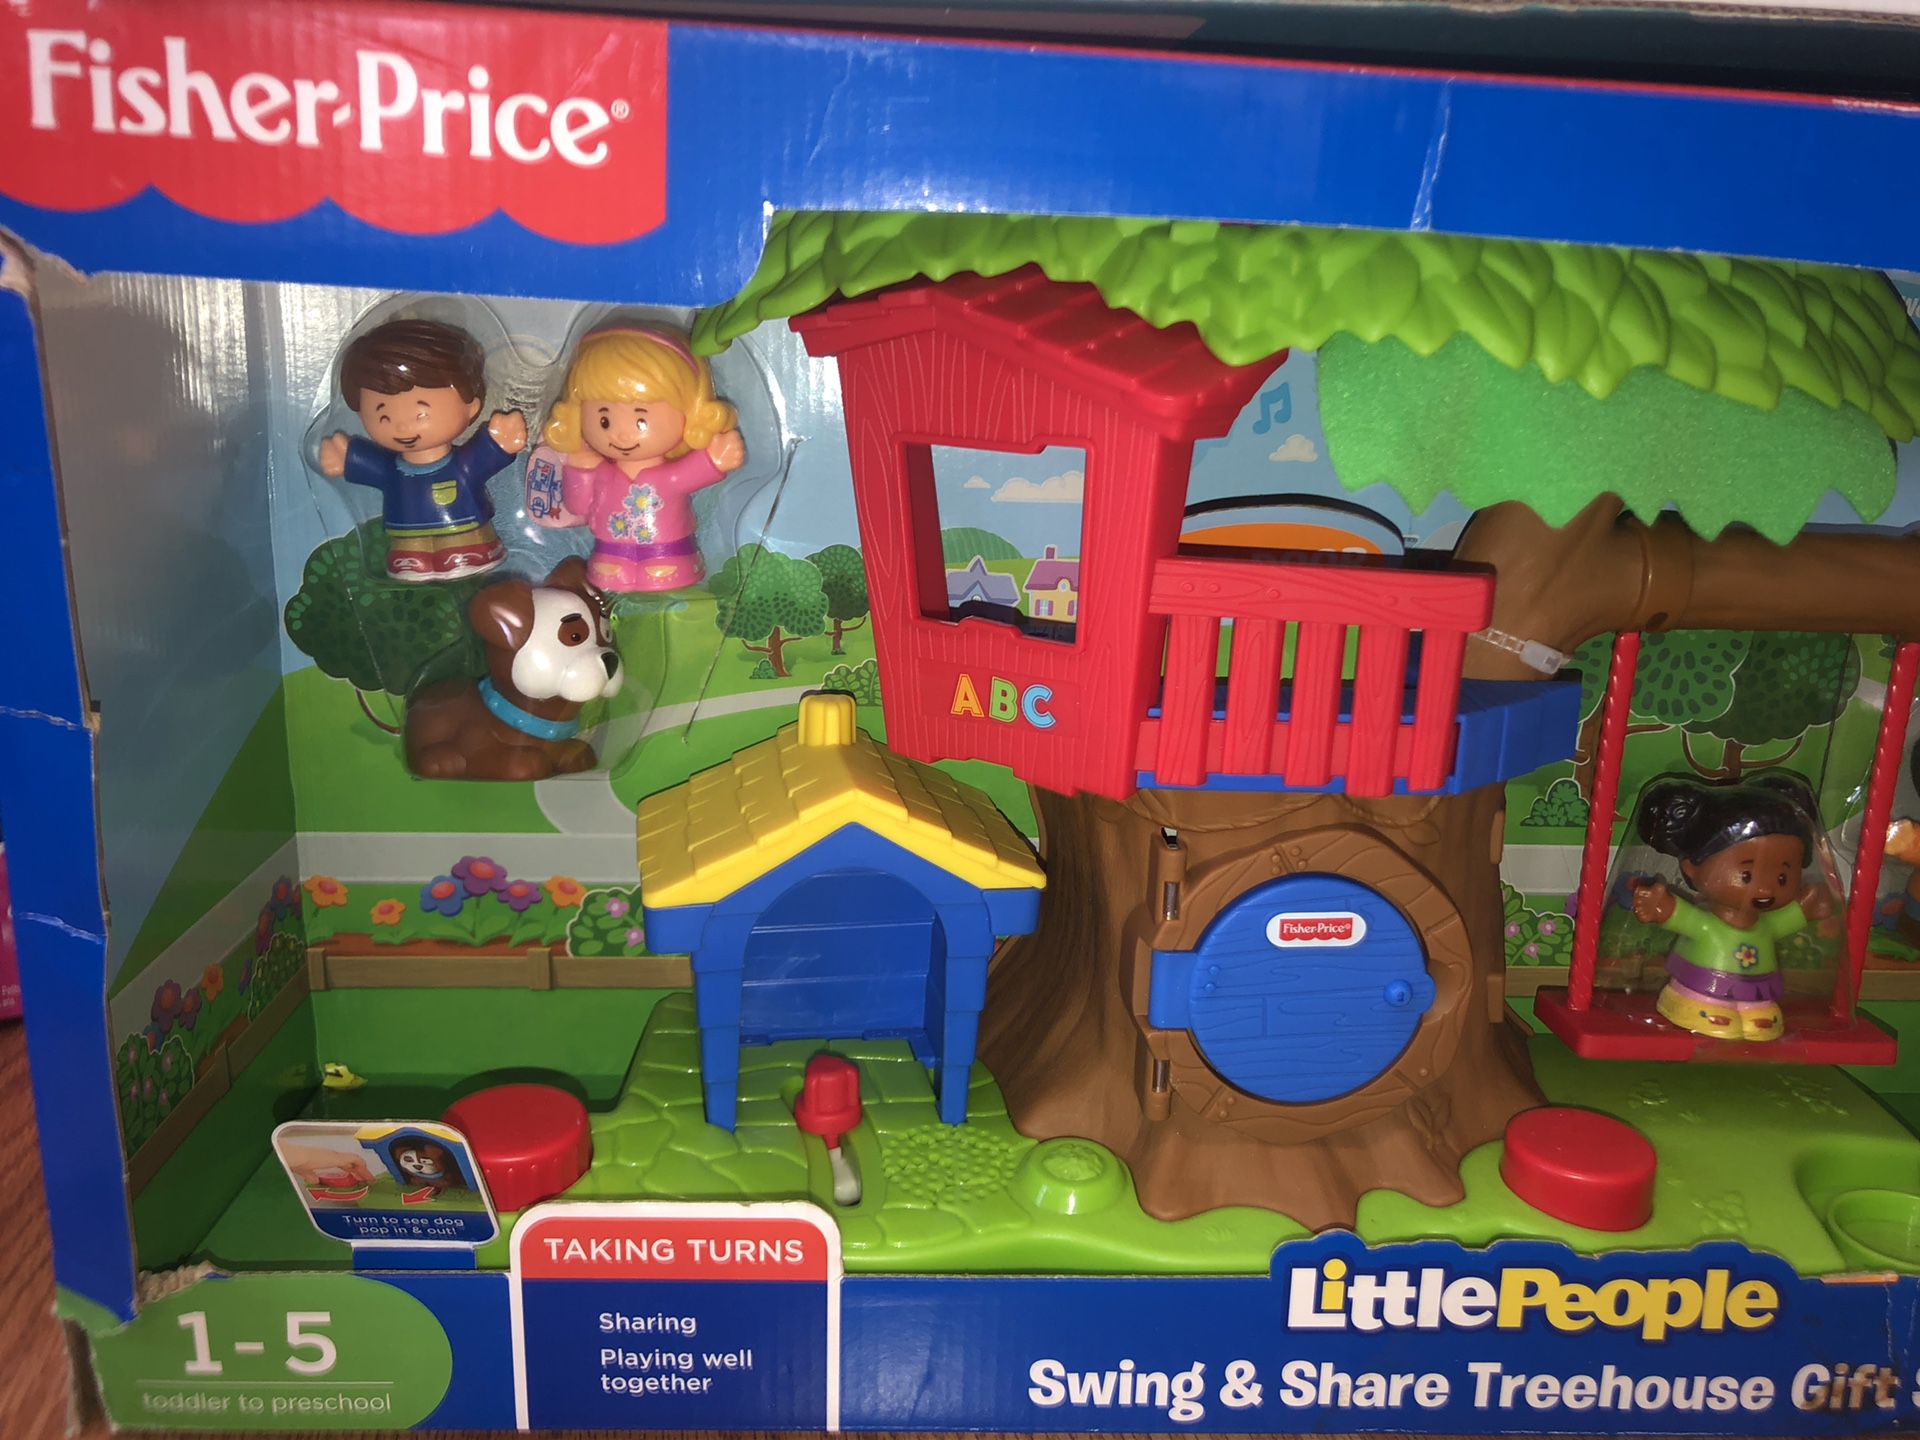 Fisher Price: Little People Swing & Share Treehouse Gift Set